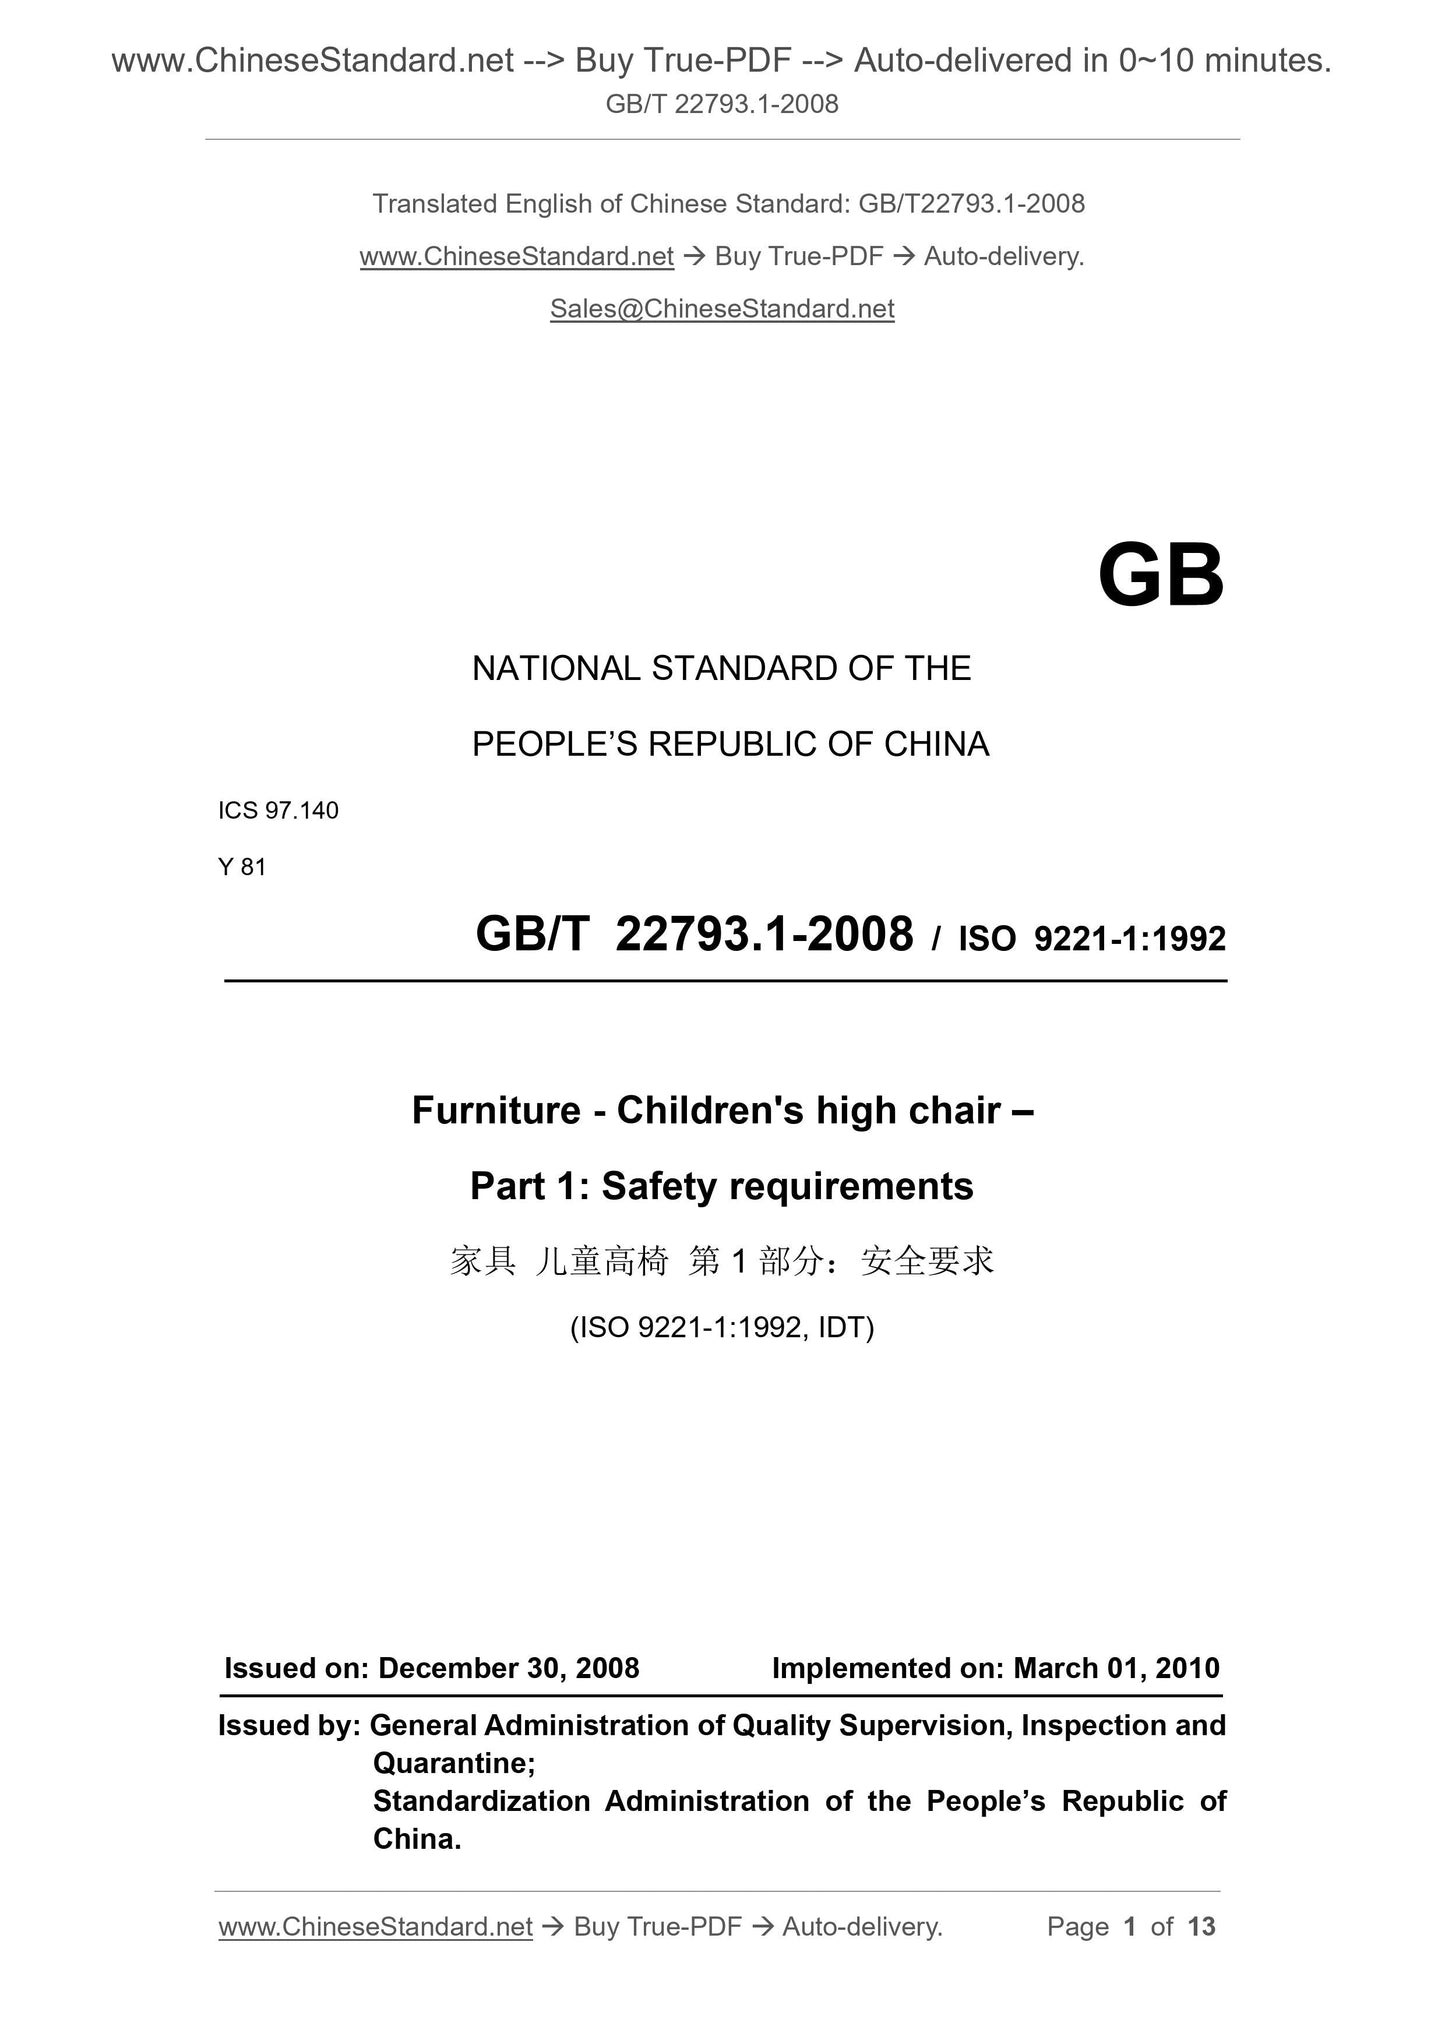 GB 22793.1-2008 Page 1